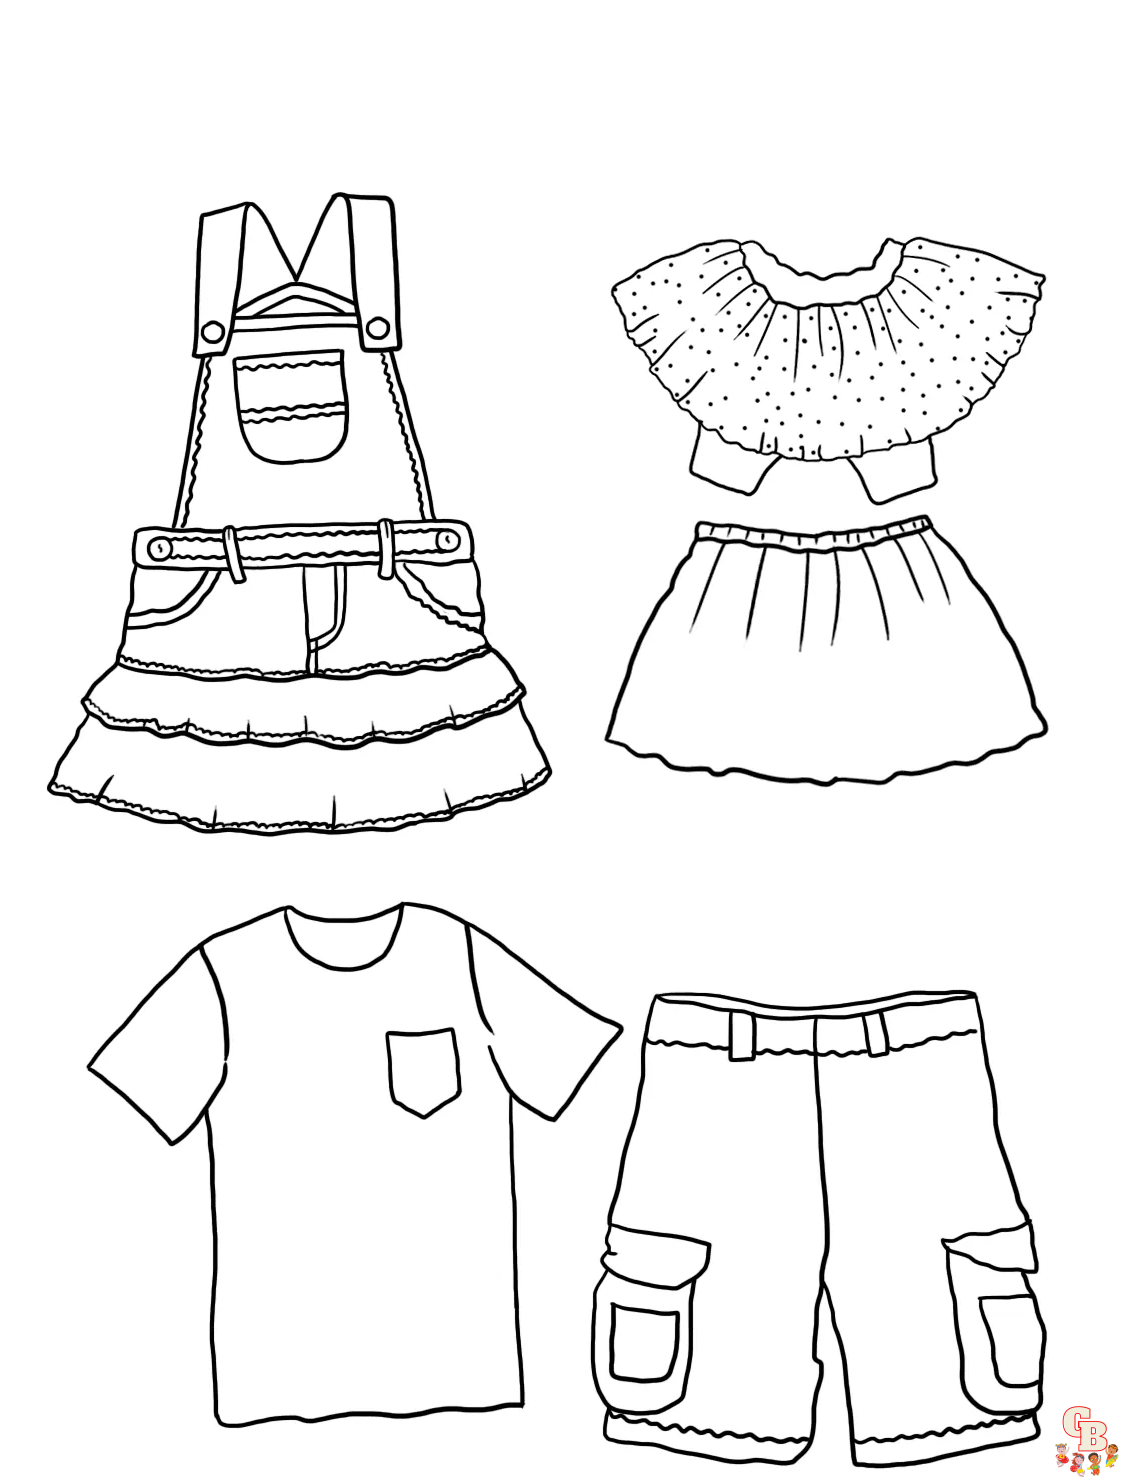 wardrobe coloring pages